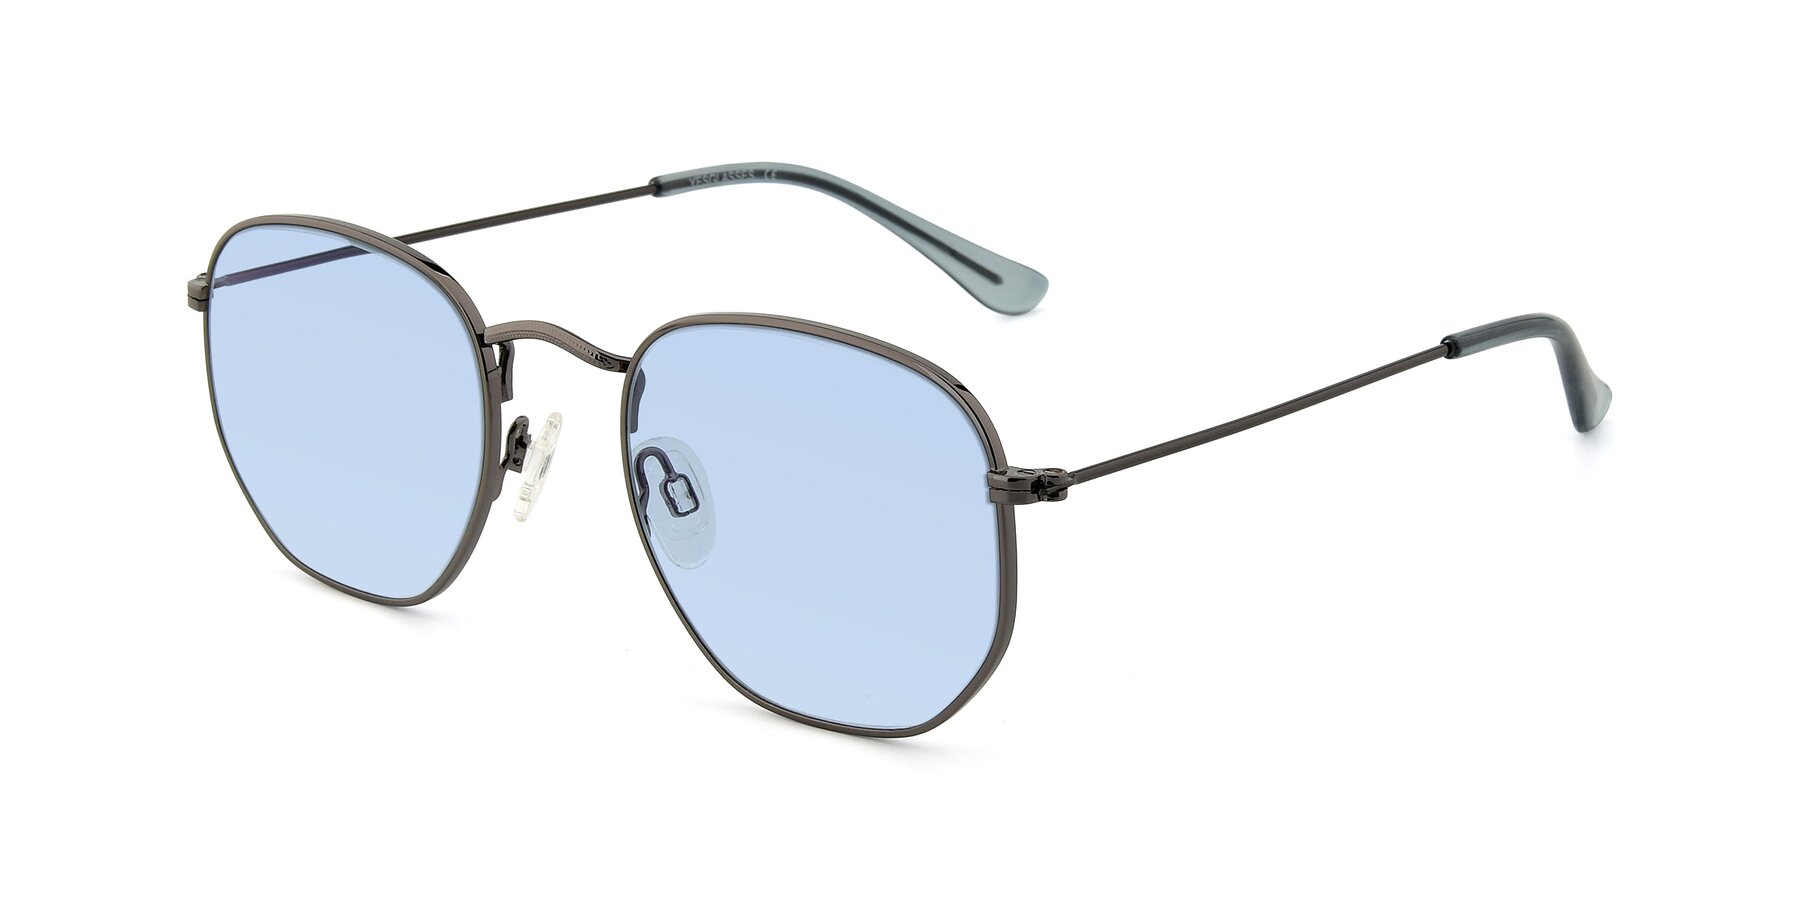 Angle of SSR1943 in Grey with Light Blue Tinted Lenses